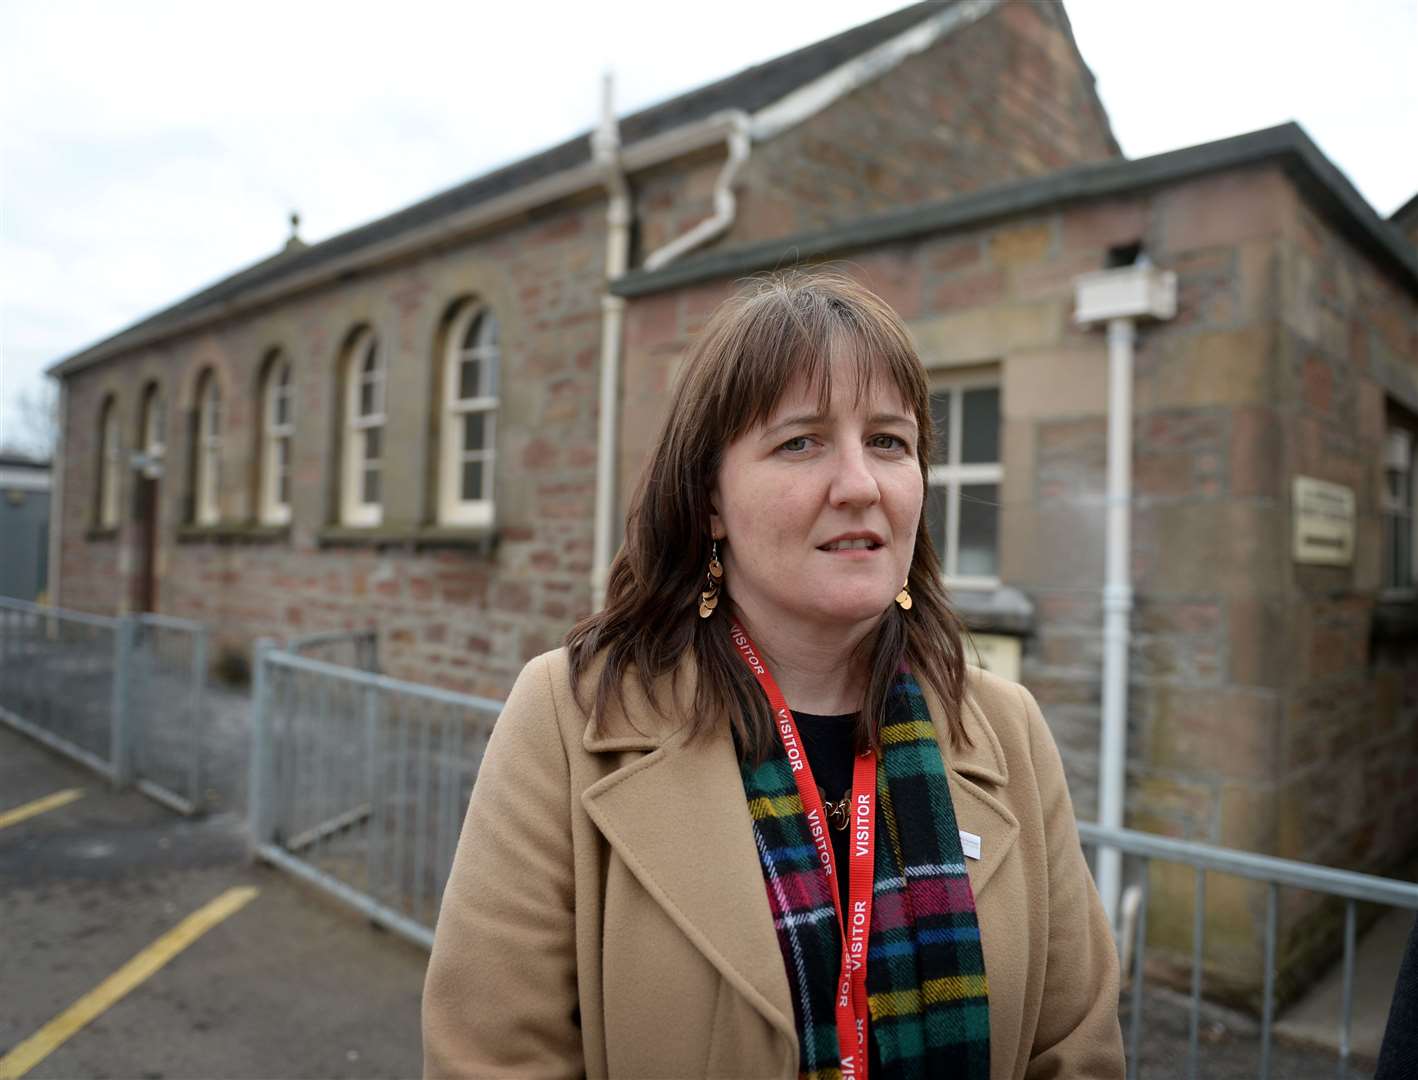 Children and young person minister MSP Maree Todd welcomed any progress after previously hitting out over the council pausing the rollout of the scheme.